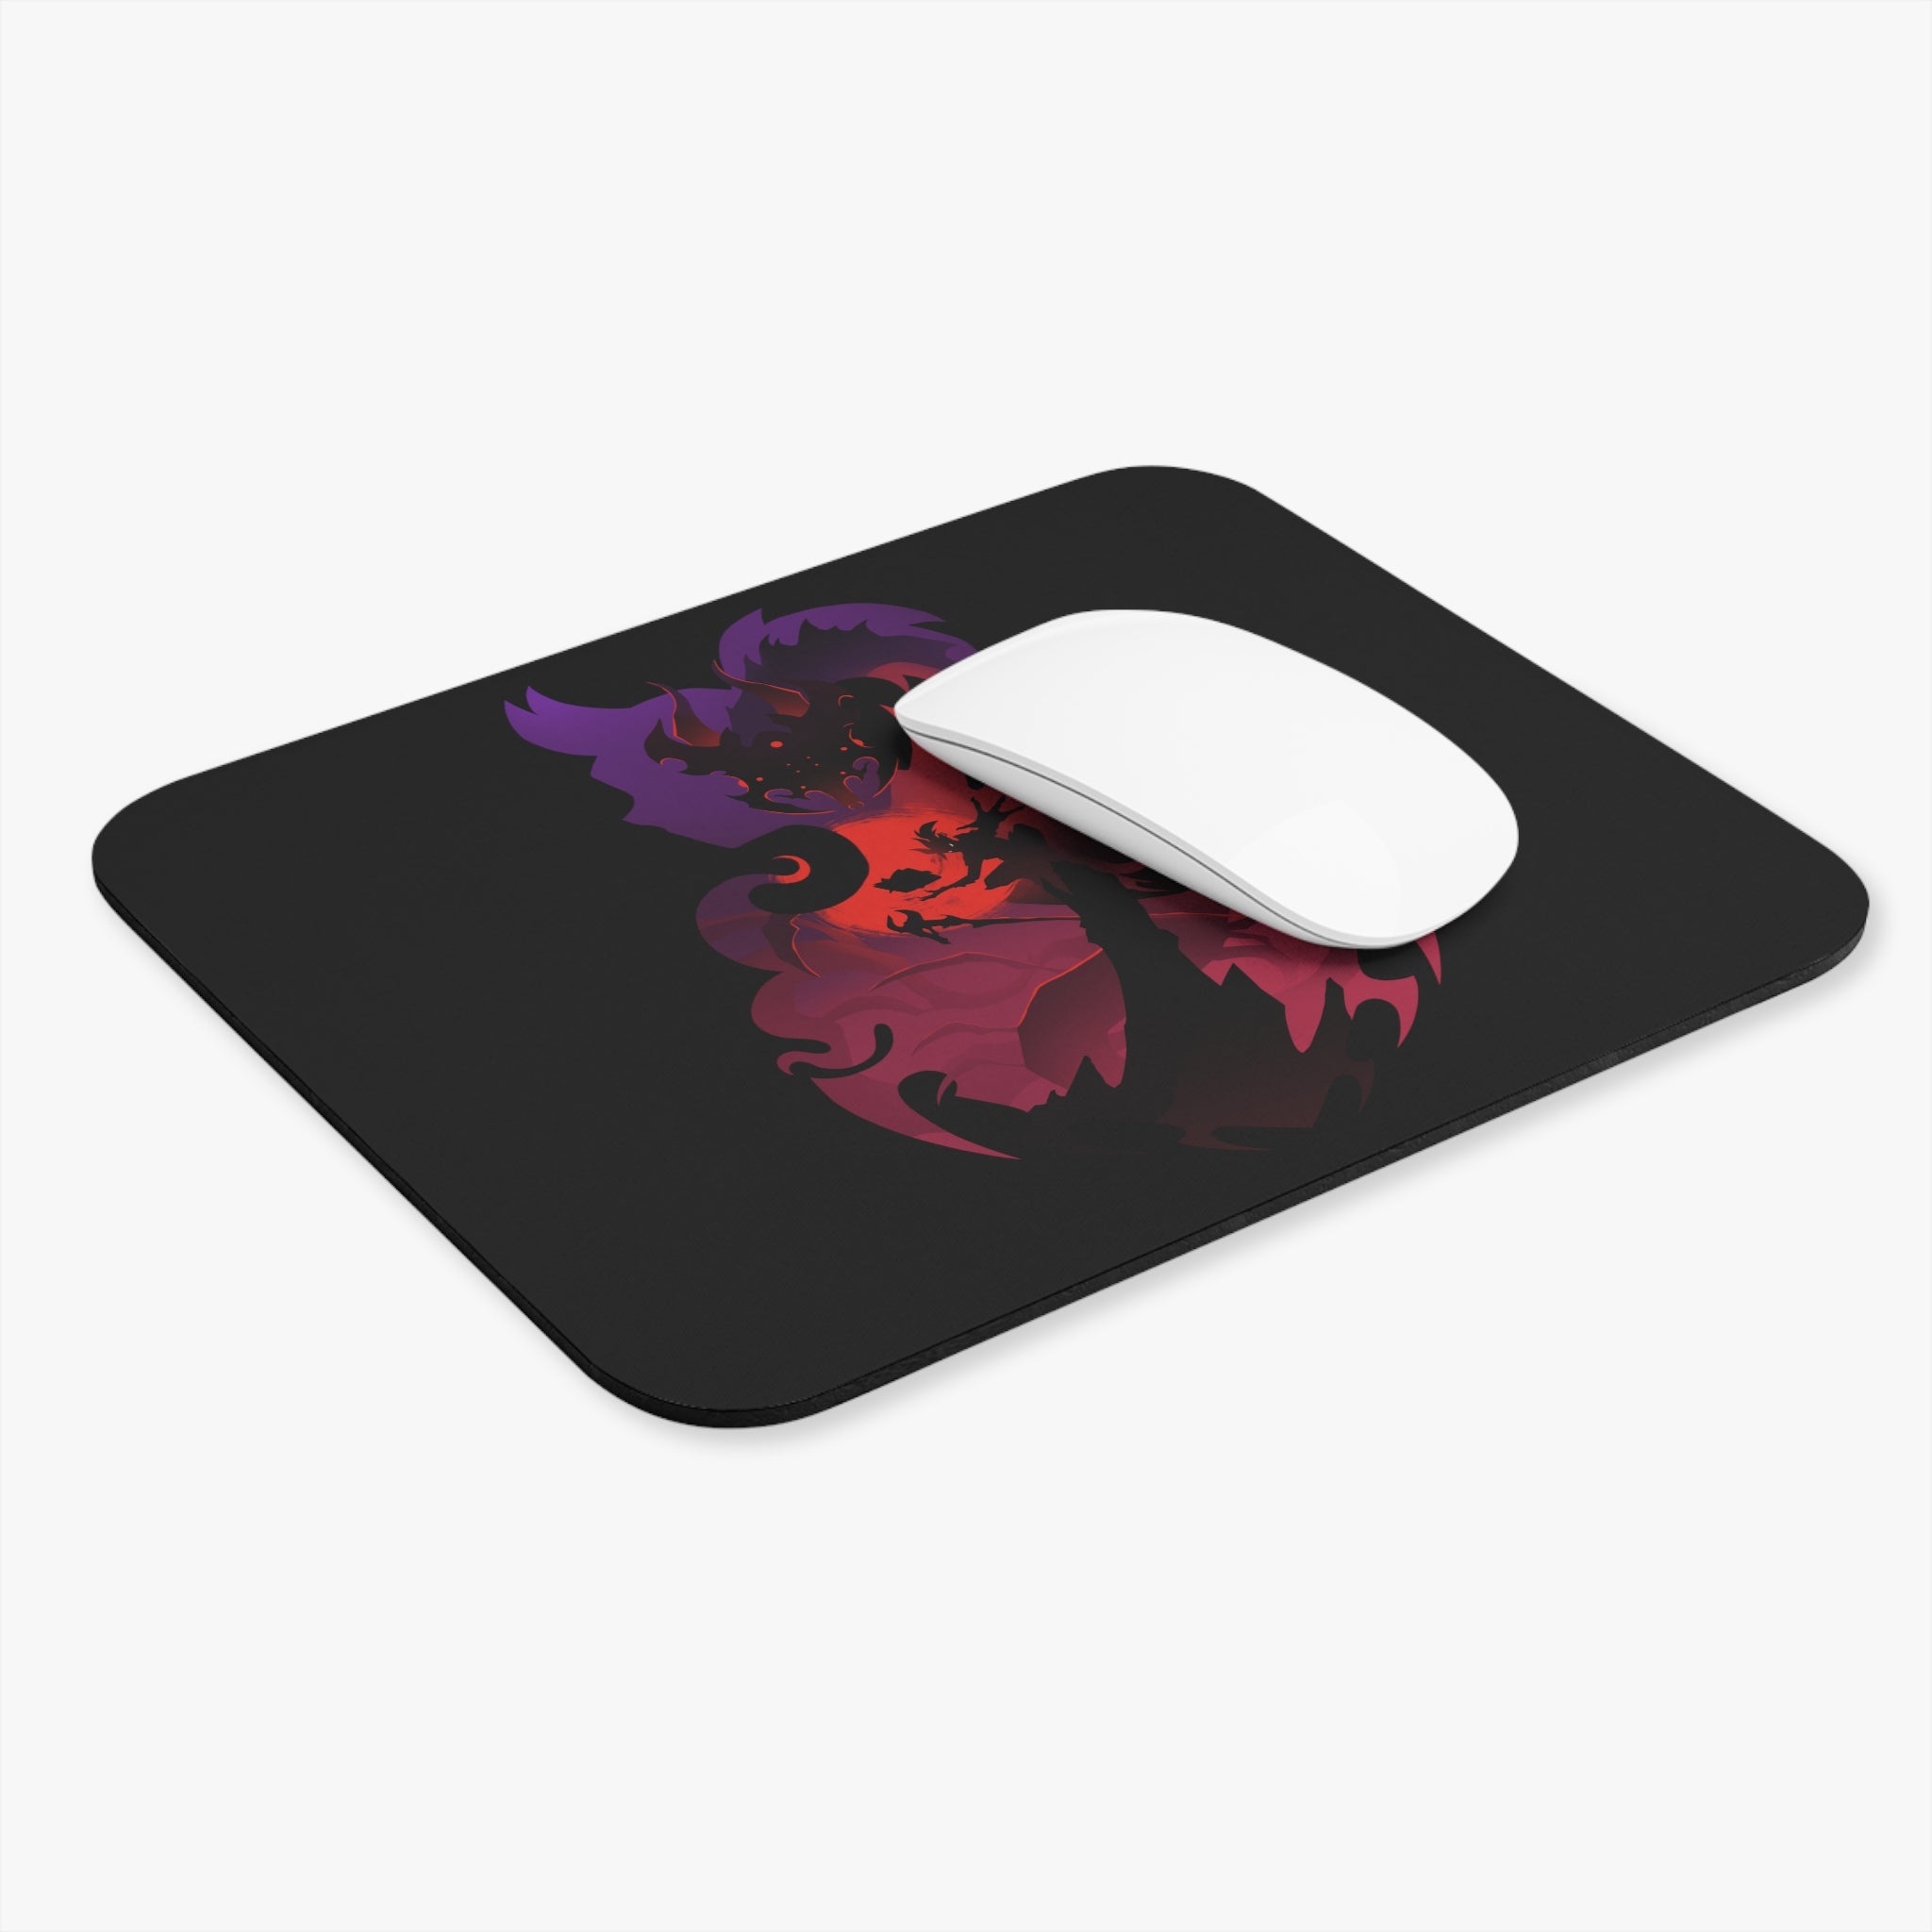 WARLOCK CLASS SILHOUETTE RECTANGLER MOUSE PAD